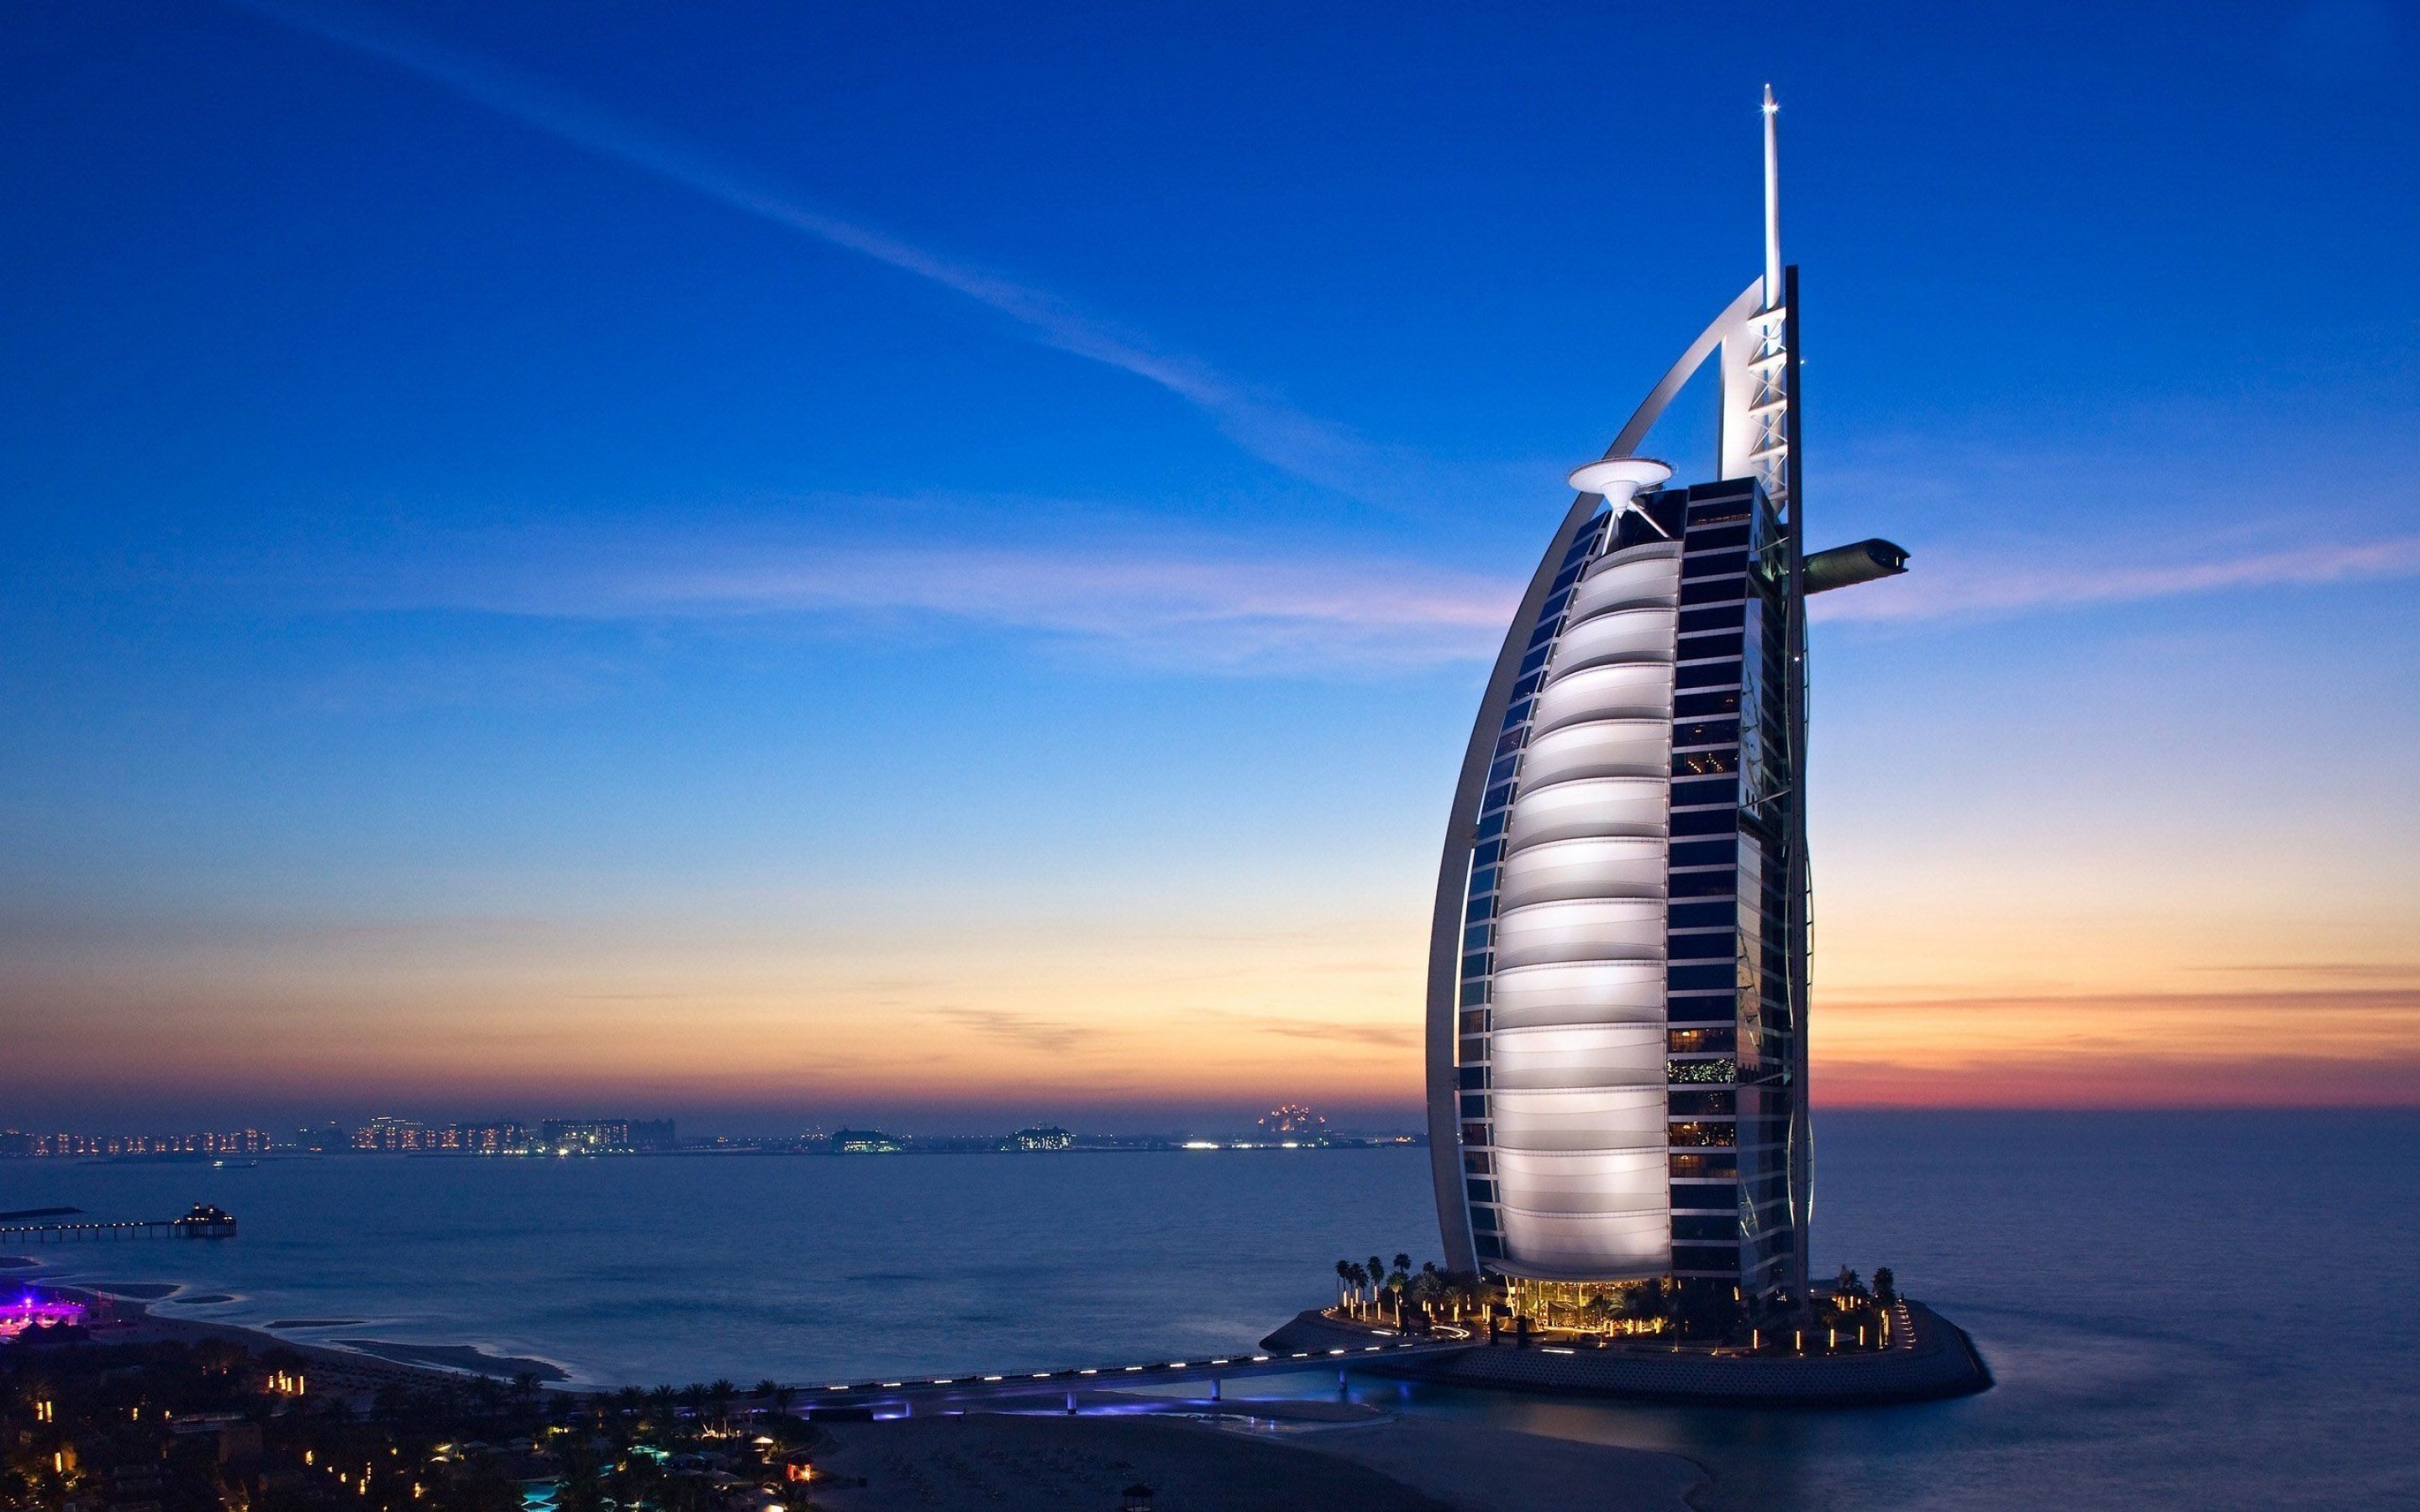 2880x1800 free dubai wallpapers show the real significance of its culture